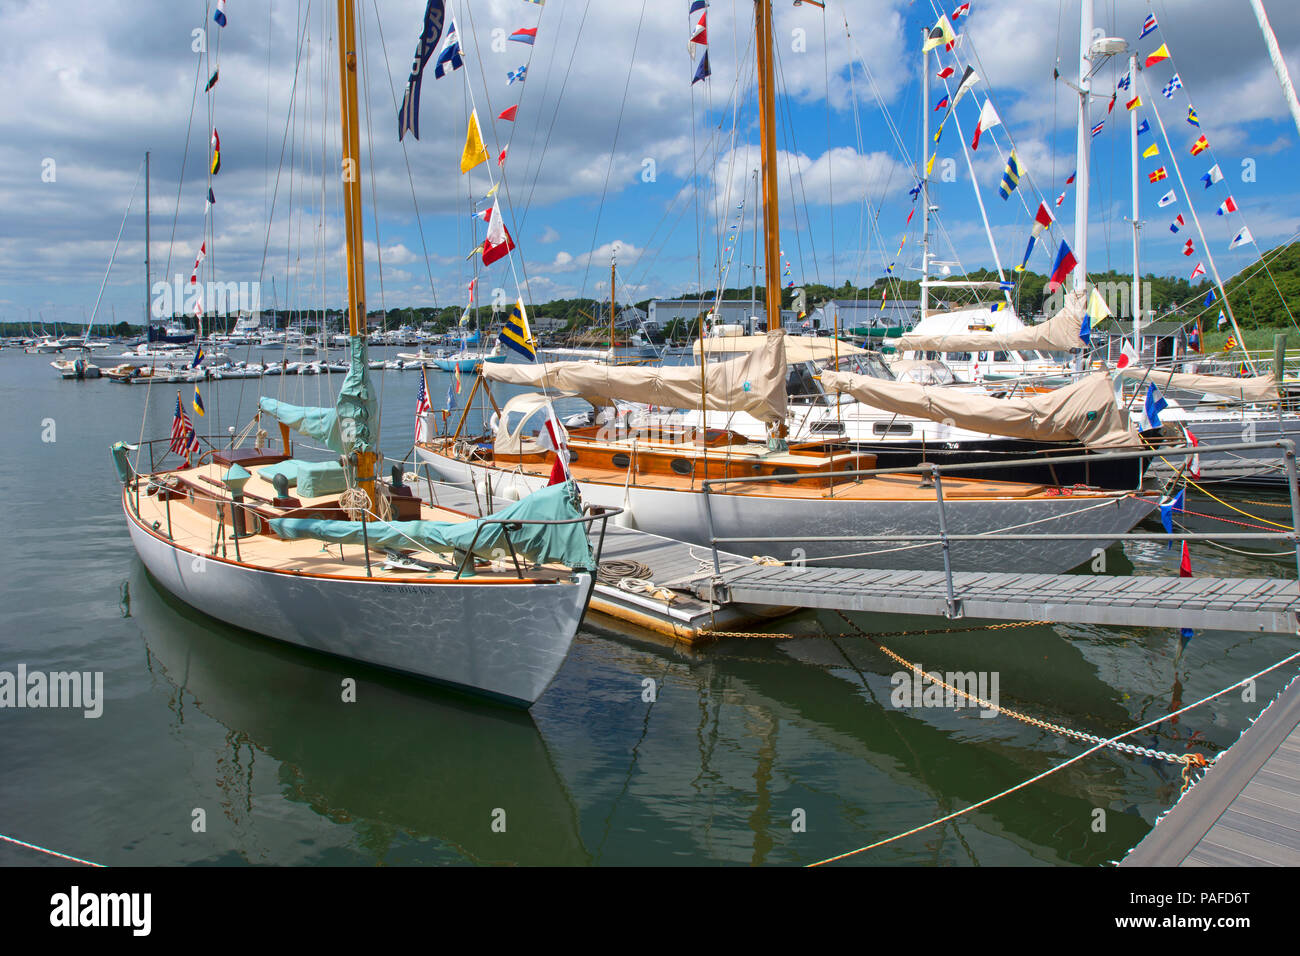 High end sailing yachts at the Parker Boat Yard in Bourne, Massachusetts on Cape Cod. Stock Photo